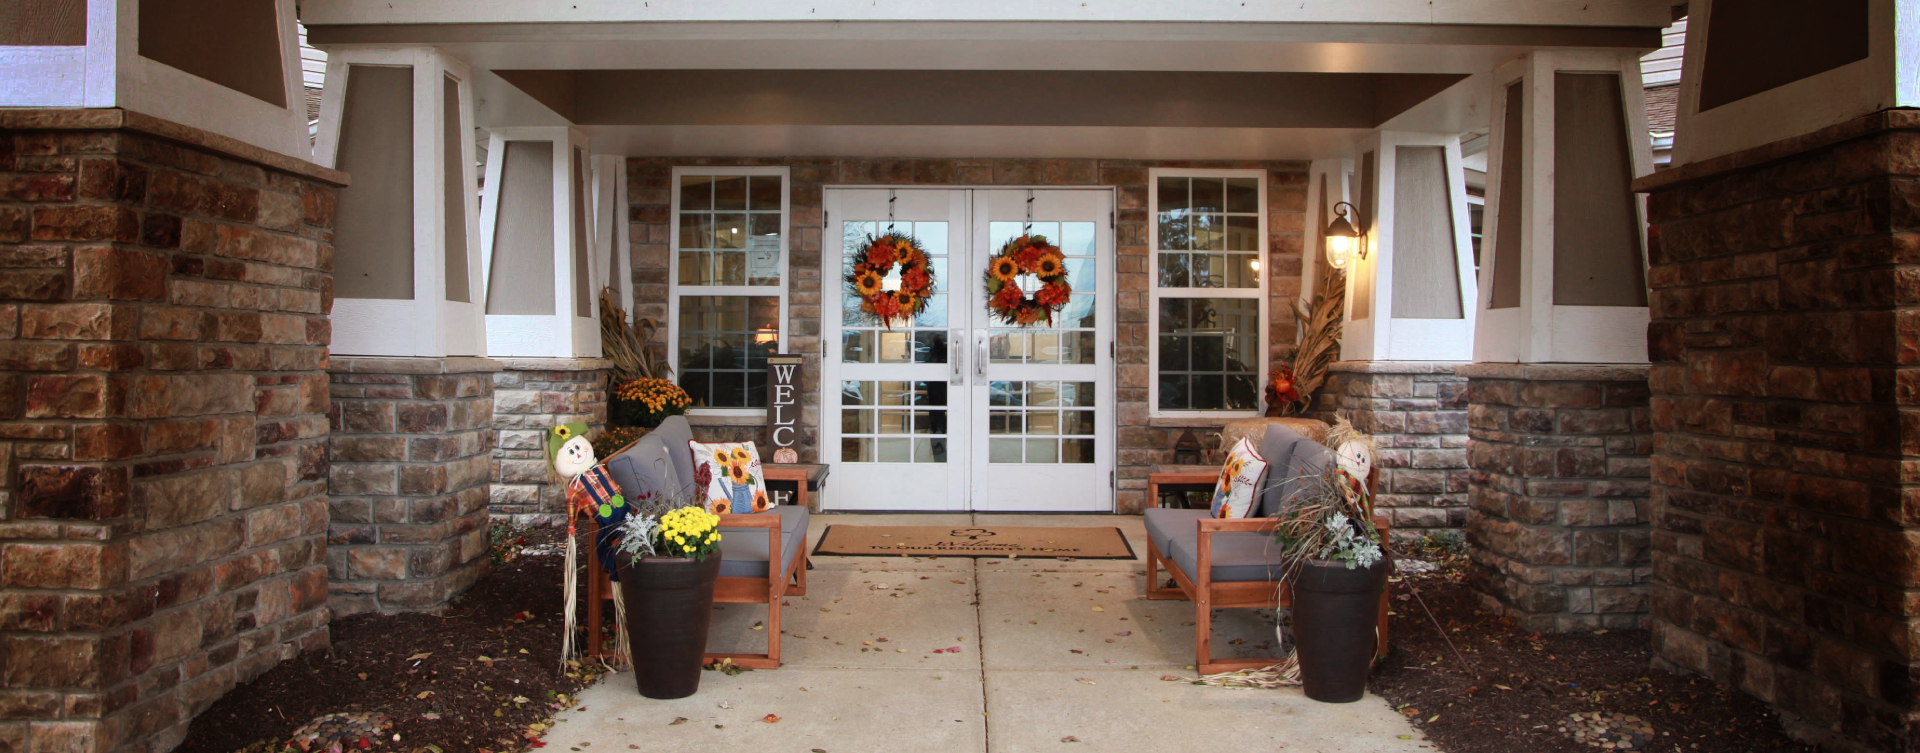 Enjoy conversations with friends on the porch at Bickford of St. Charles